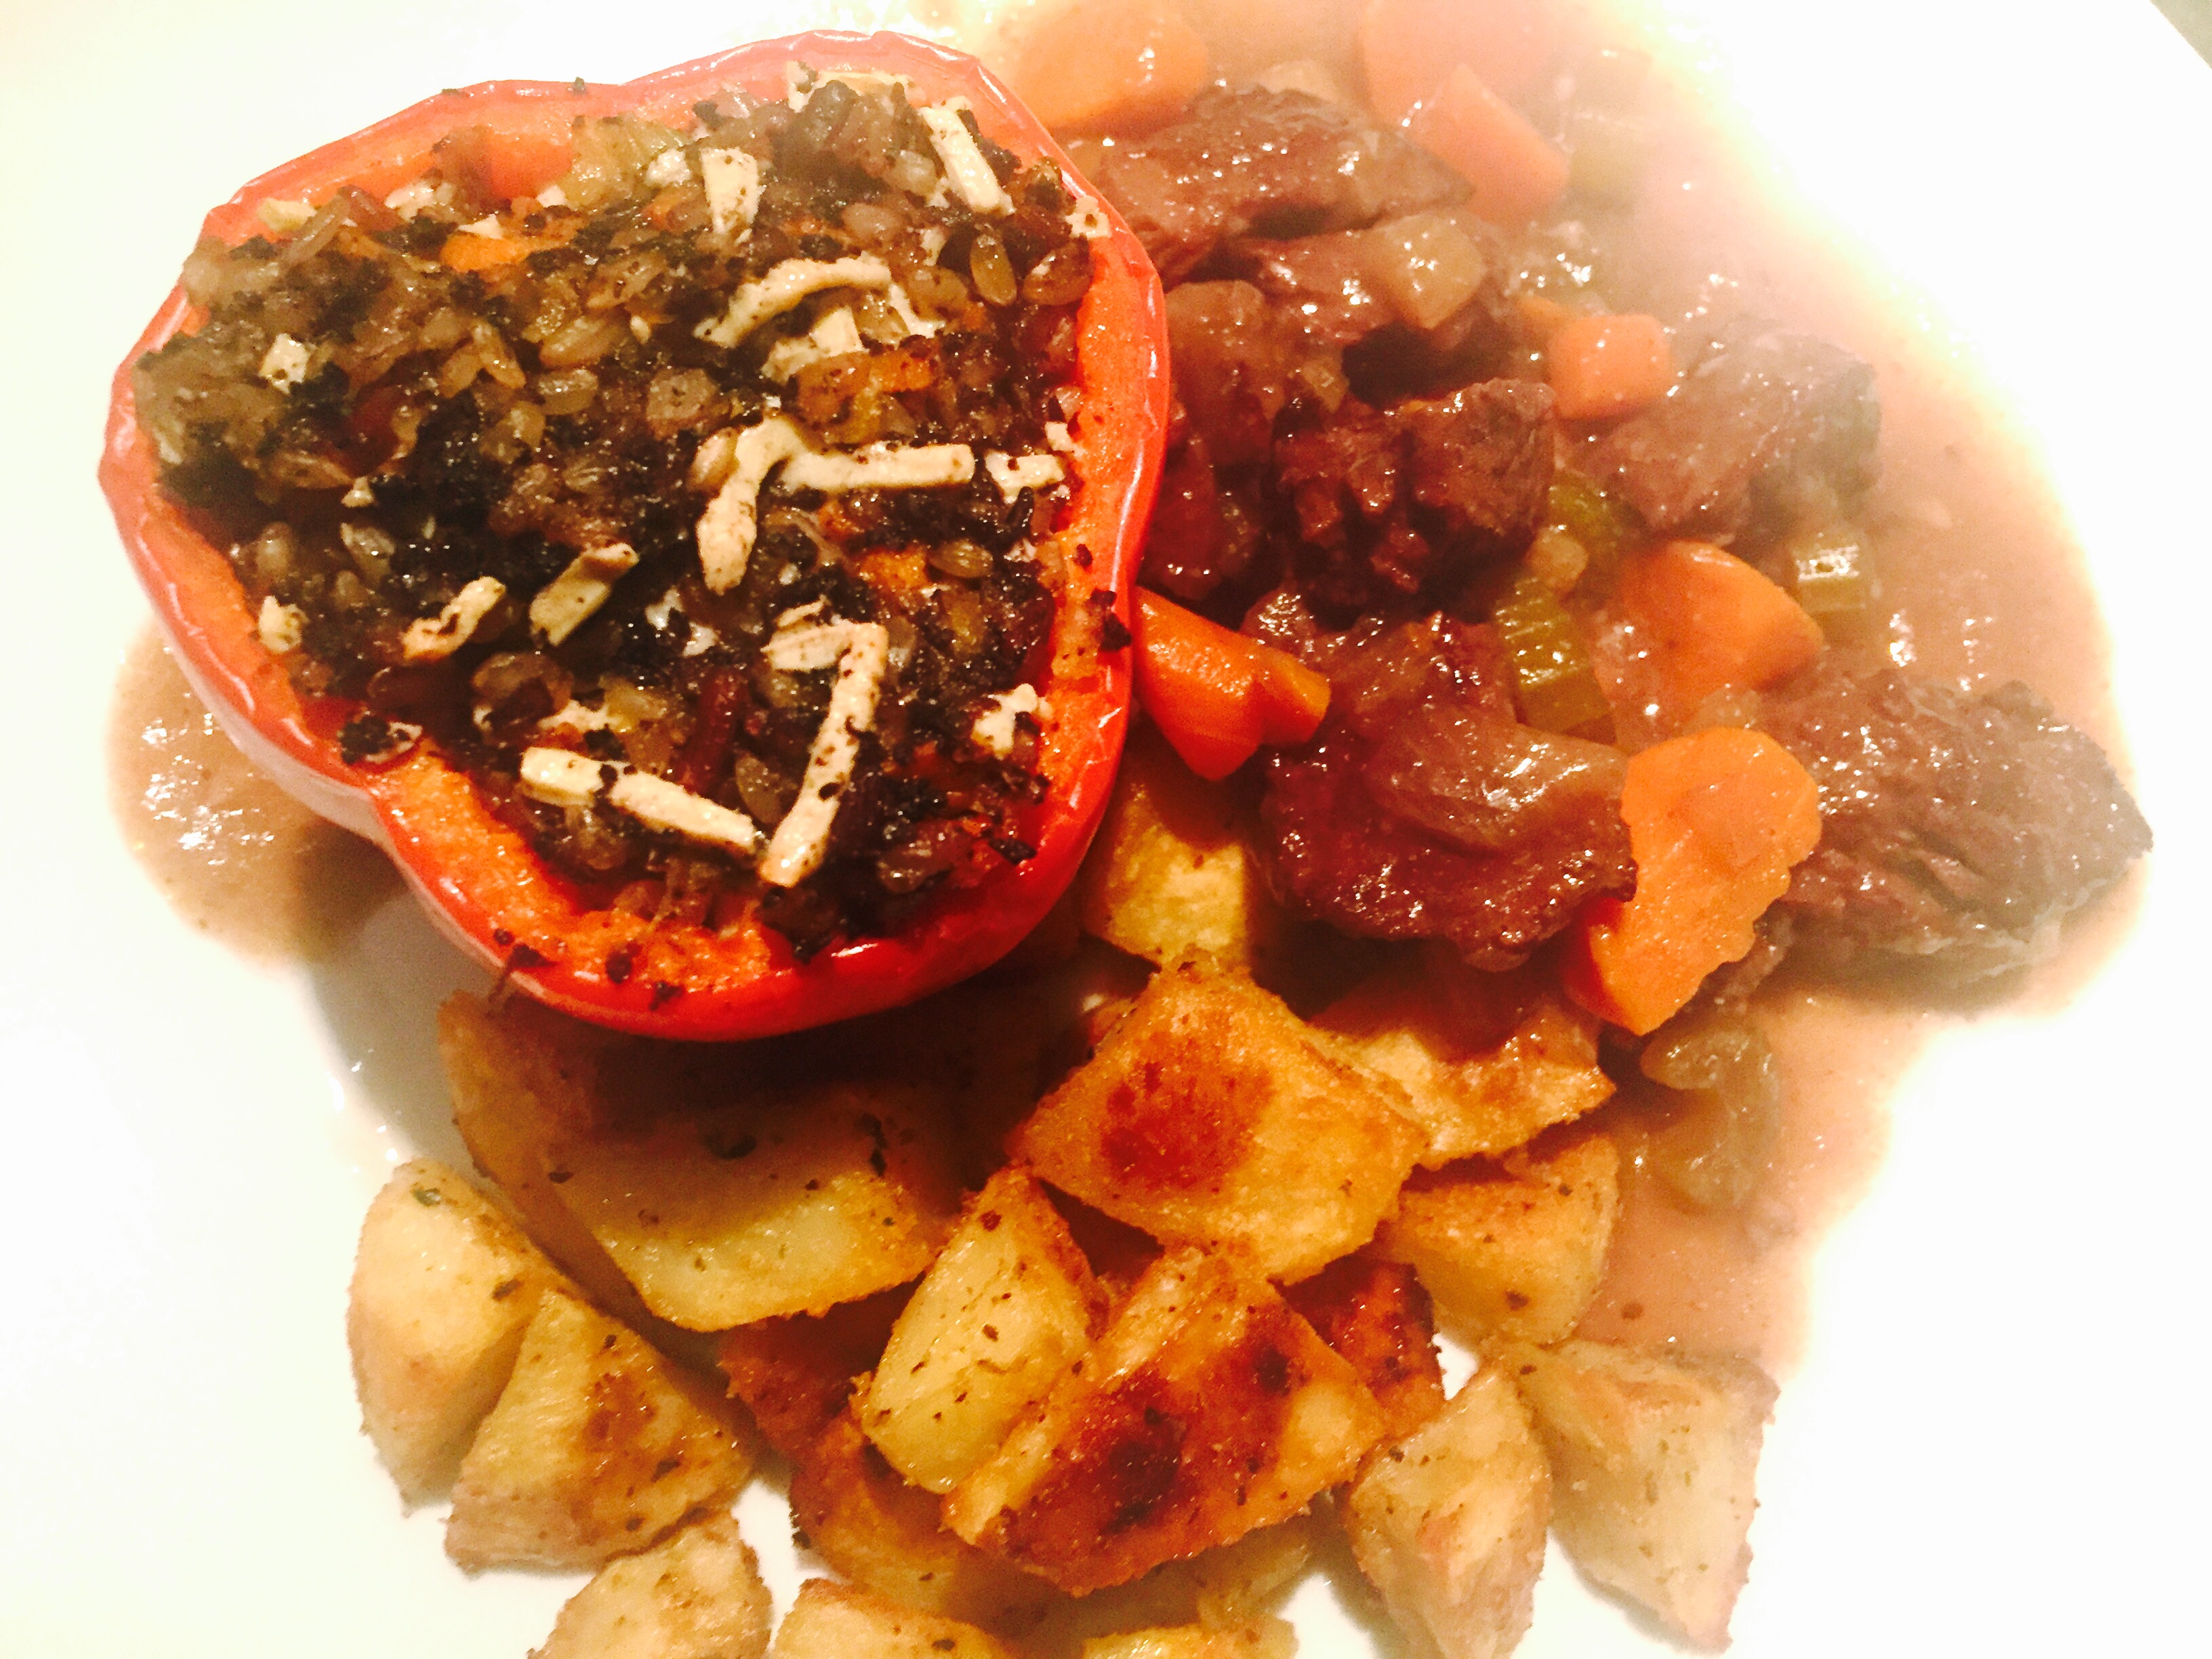 Braised Beef Stew with Mushroom-Stuffed Peppers and Roasted Potatoes